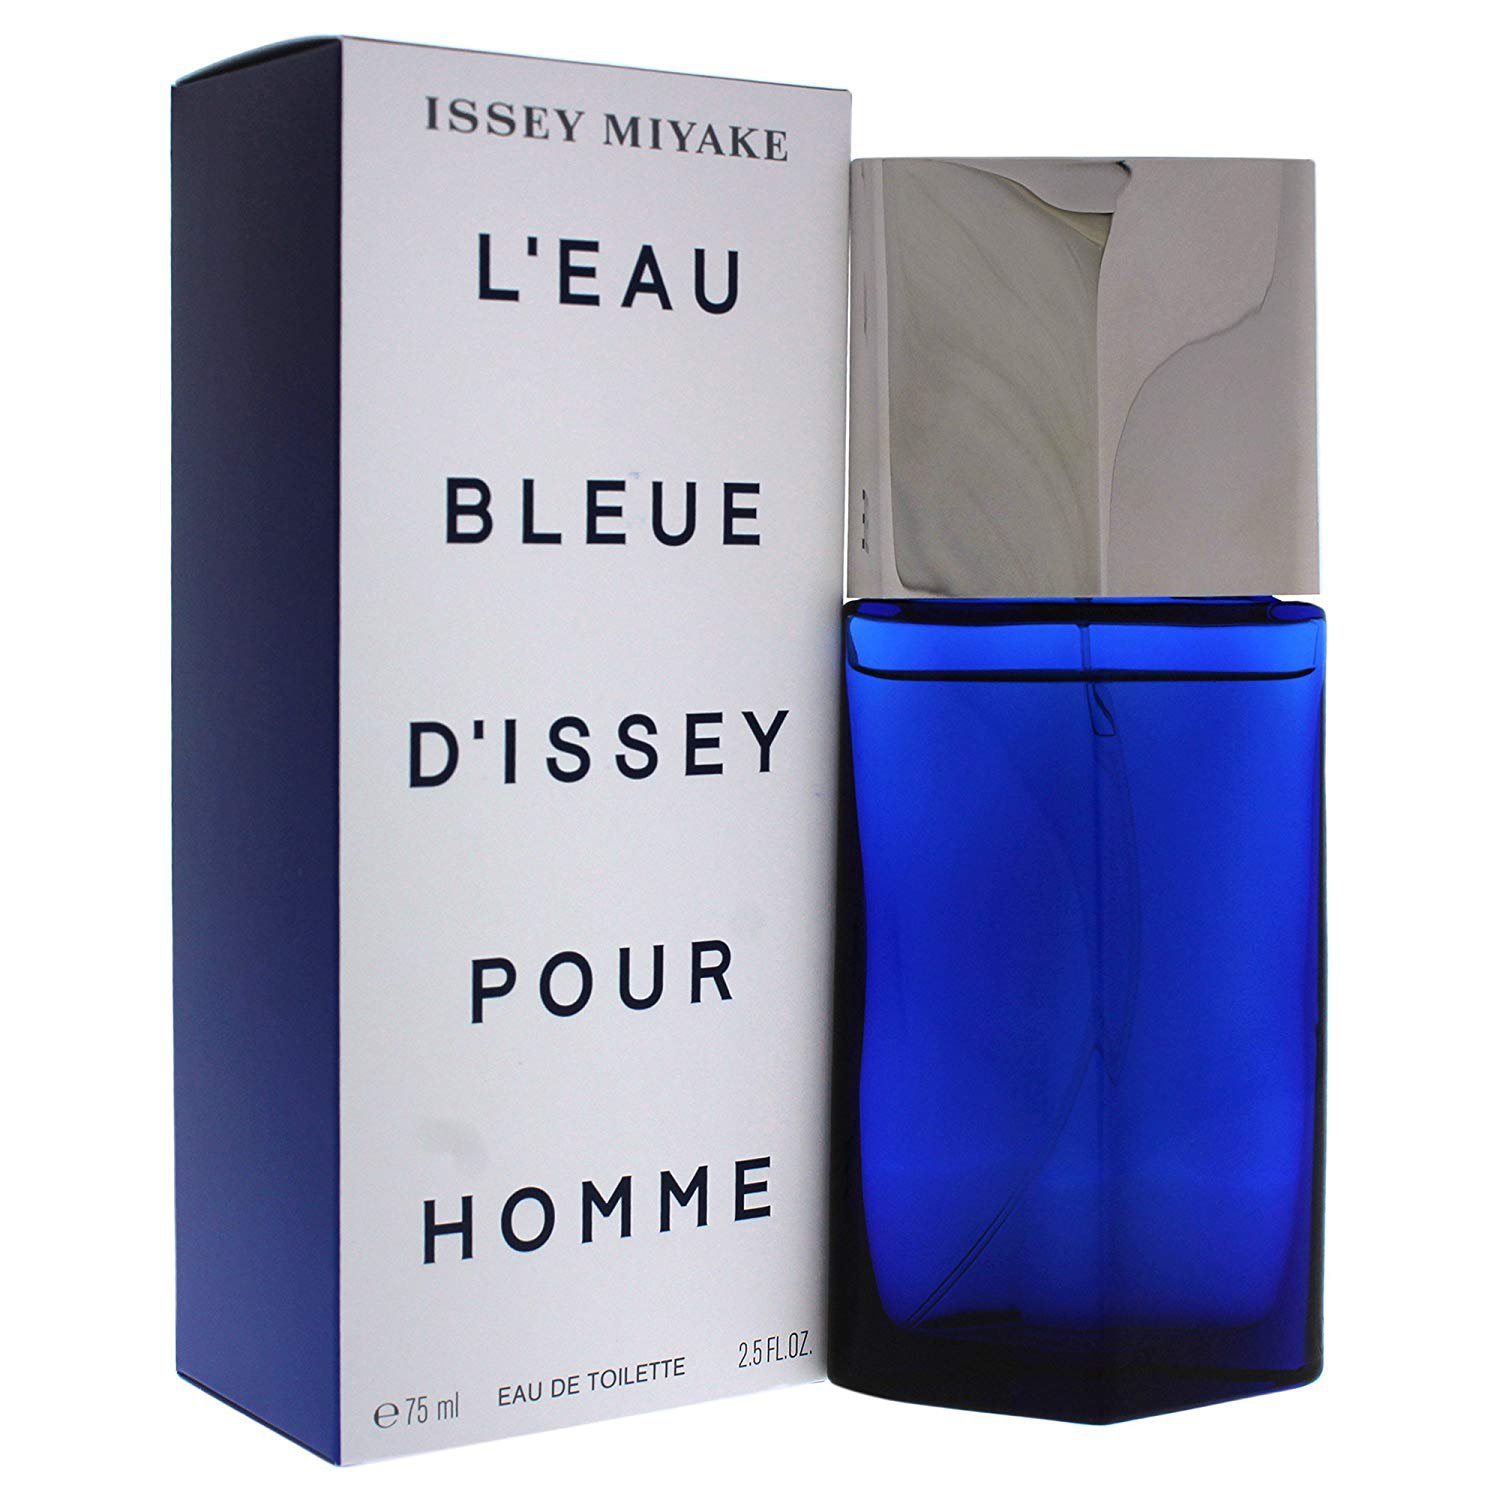 Issey miyake духи. Issey Miyake l'Eau bleue d'Issey pour. L’Eau bleue d’Issey pour homme Issey Miyake for men. Туалетная вода Issey Miyake l'Eau d'Issey. Issey Miyake l'Eau d'Issey pour homme 125ml EDT.